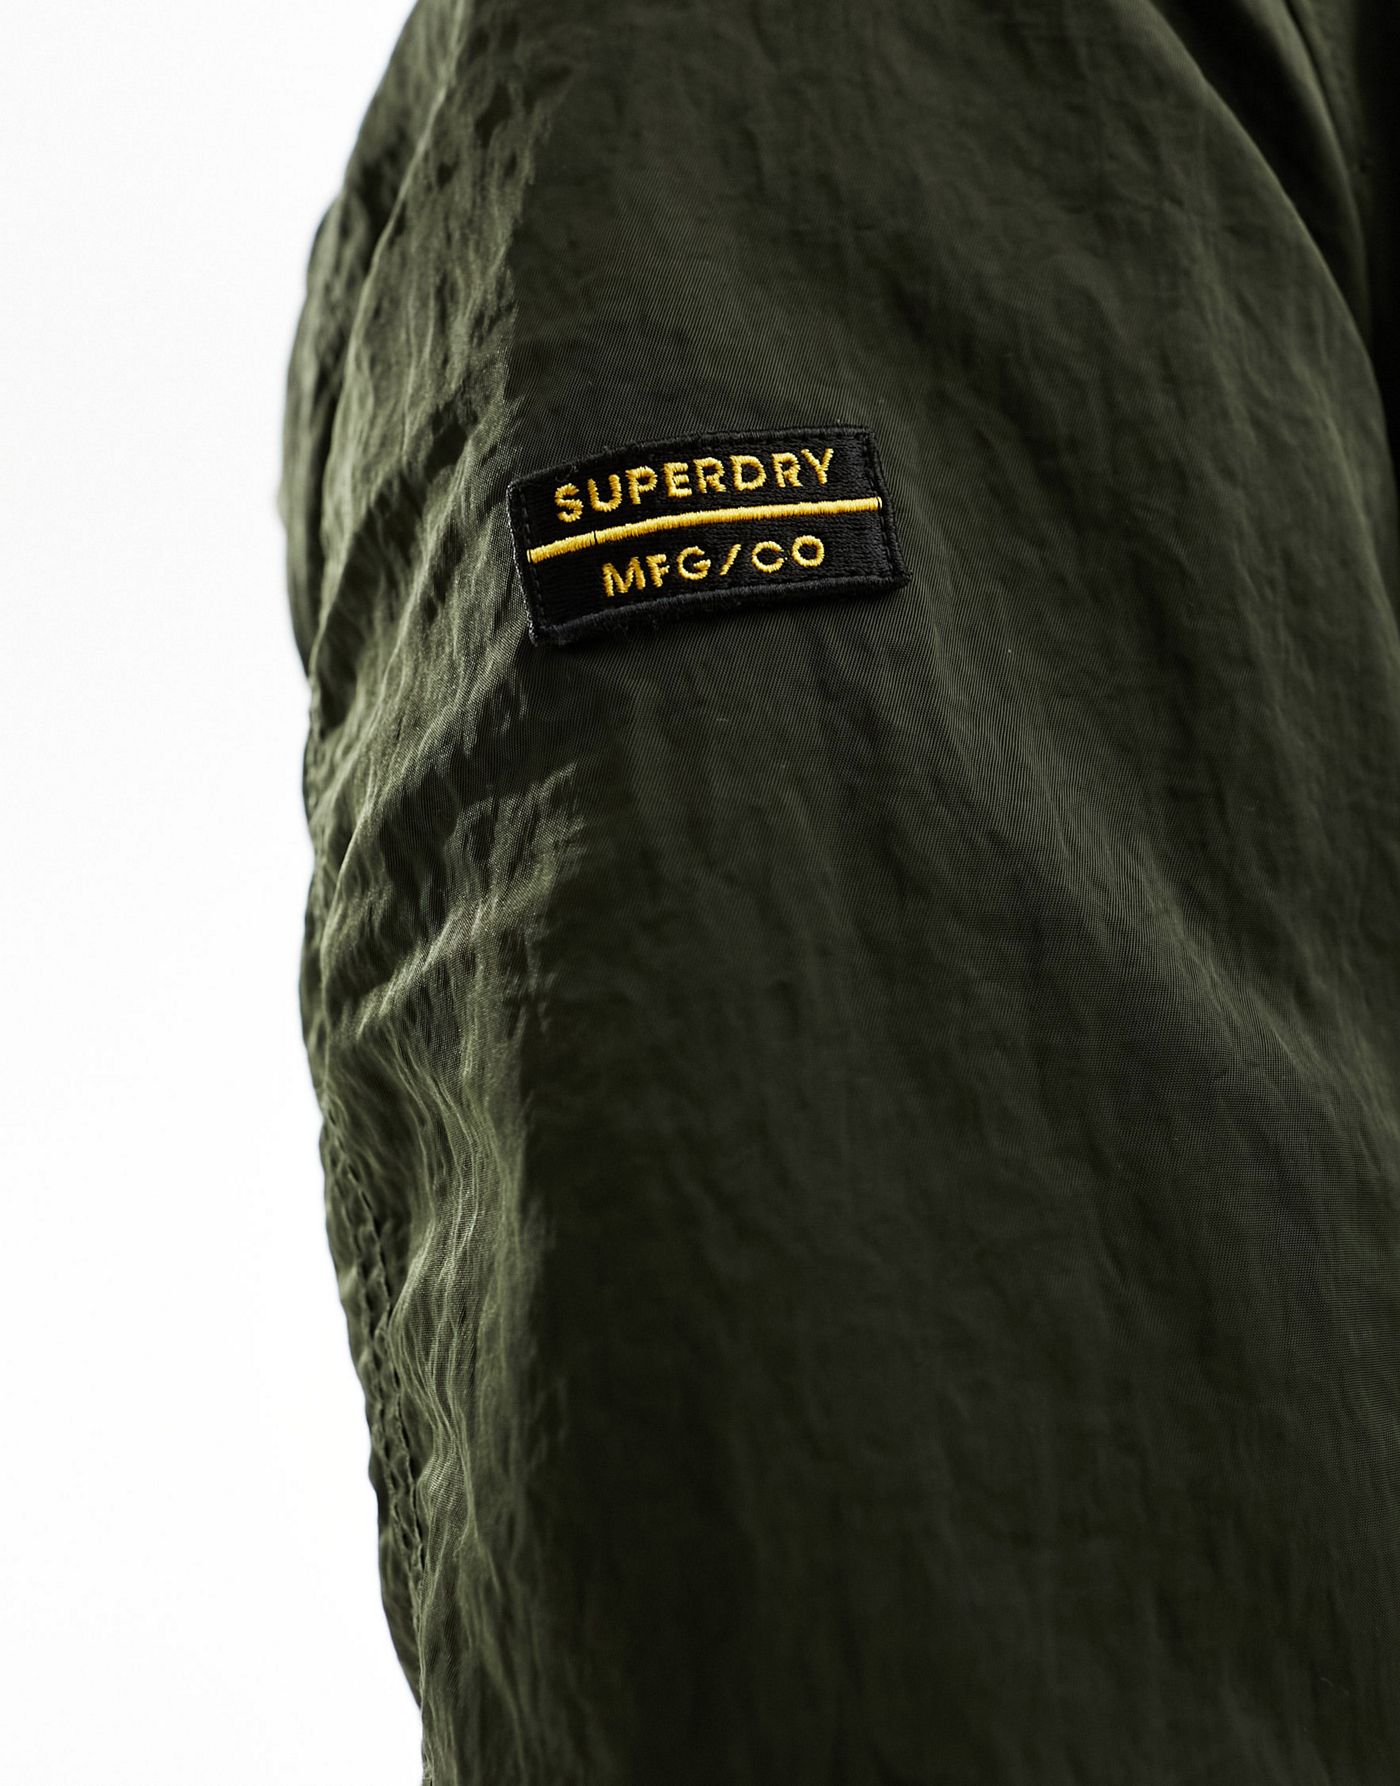 Superdry Military hooded ma1 bomber jacket in surplus goods olive